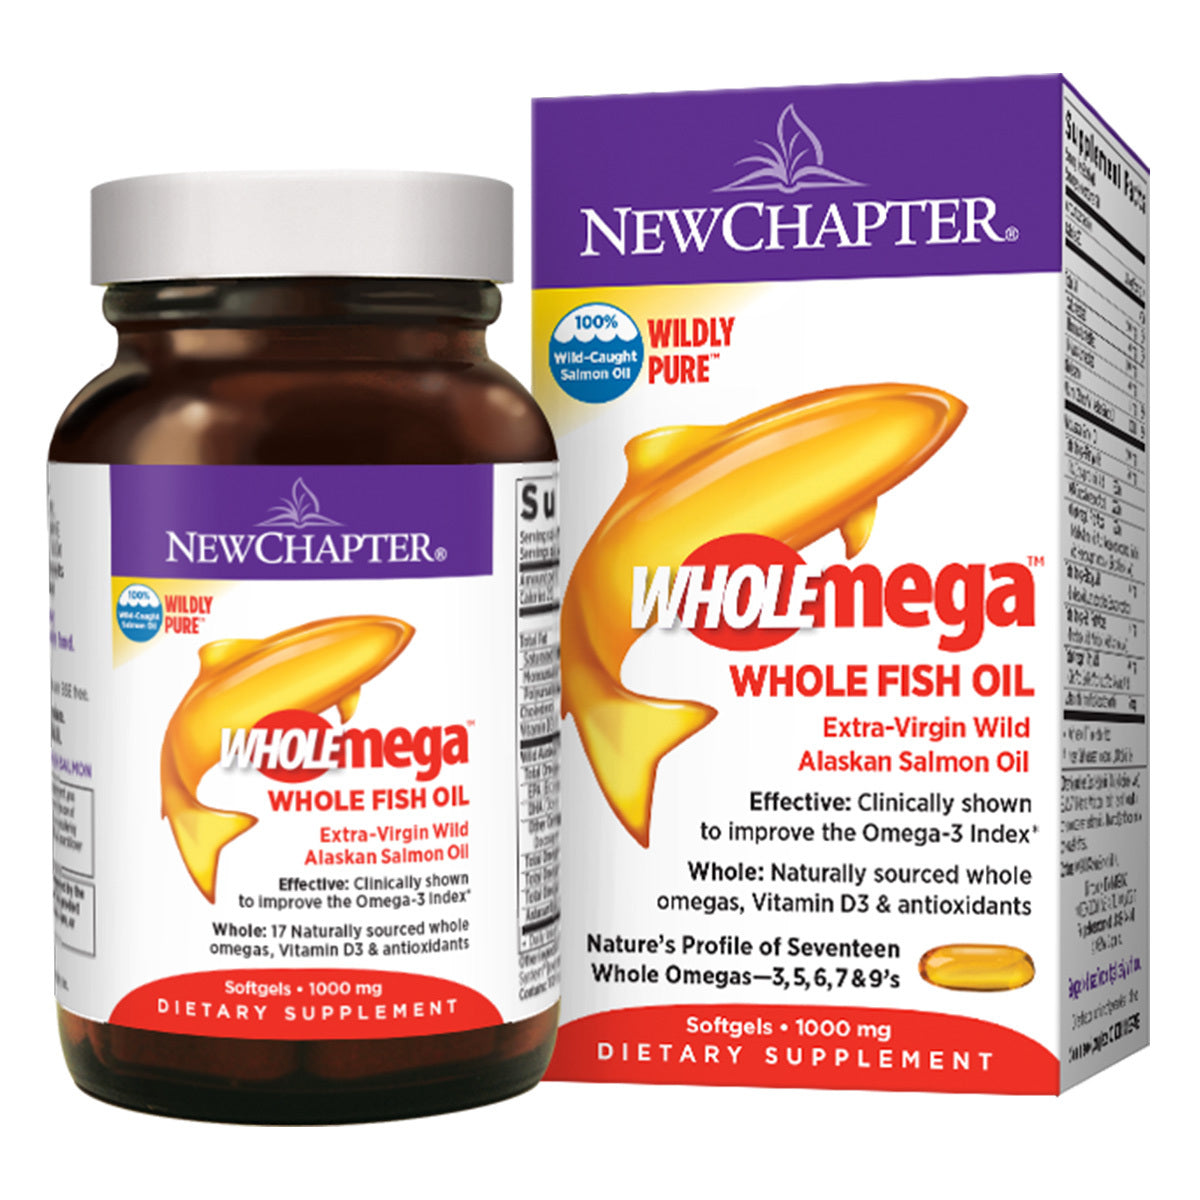 Primary image of Wholemega 1000mg Whole Fish Oil